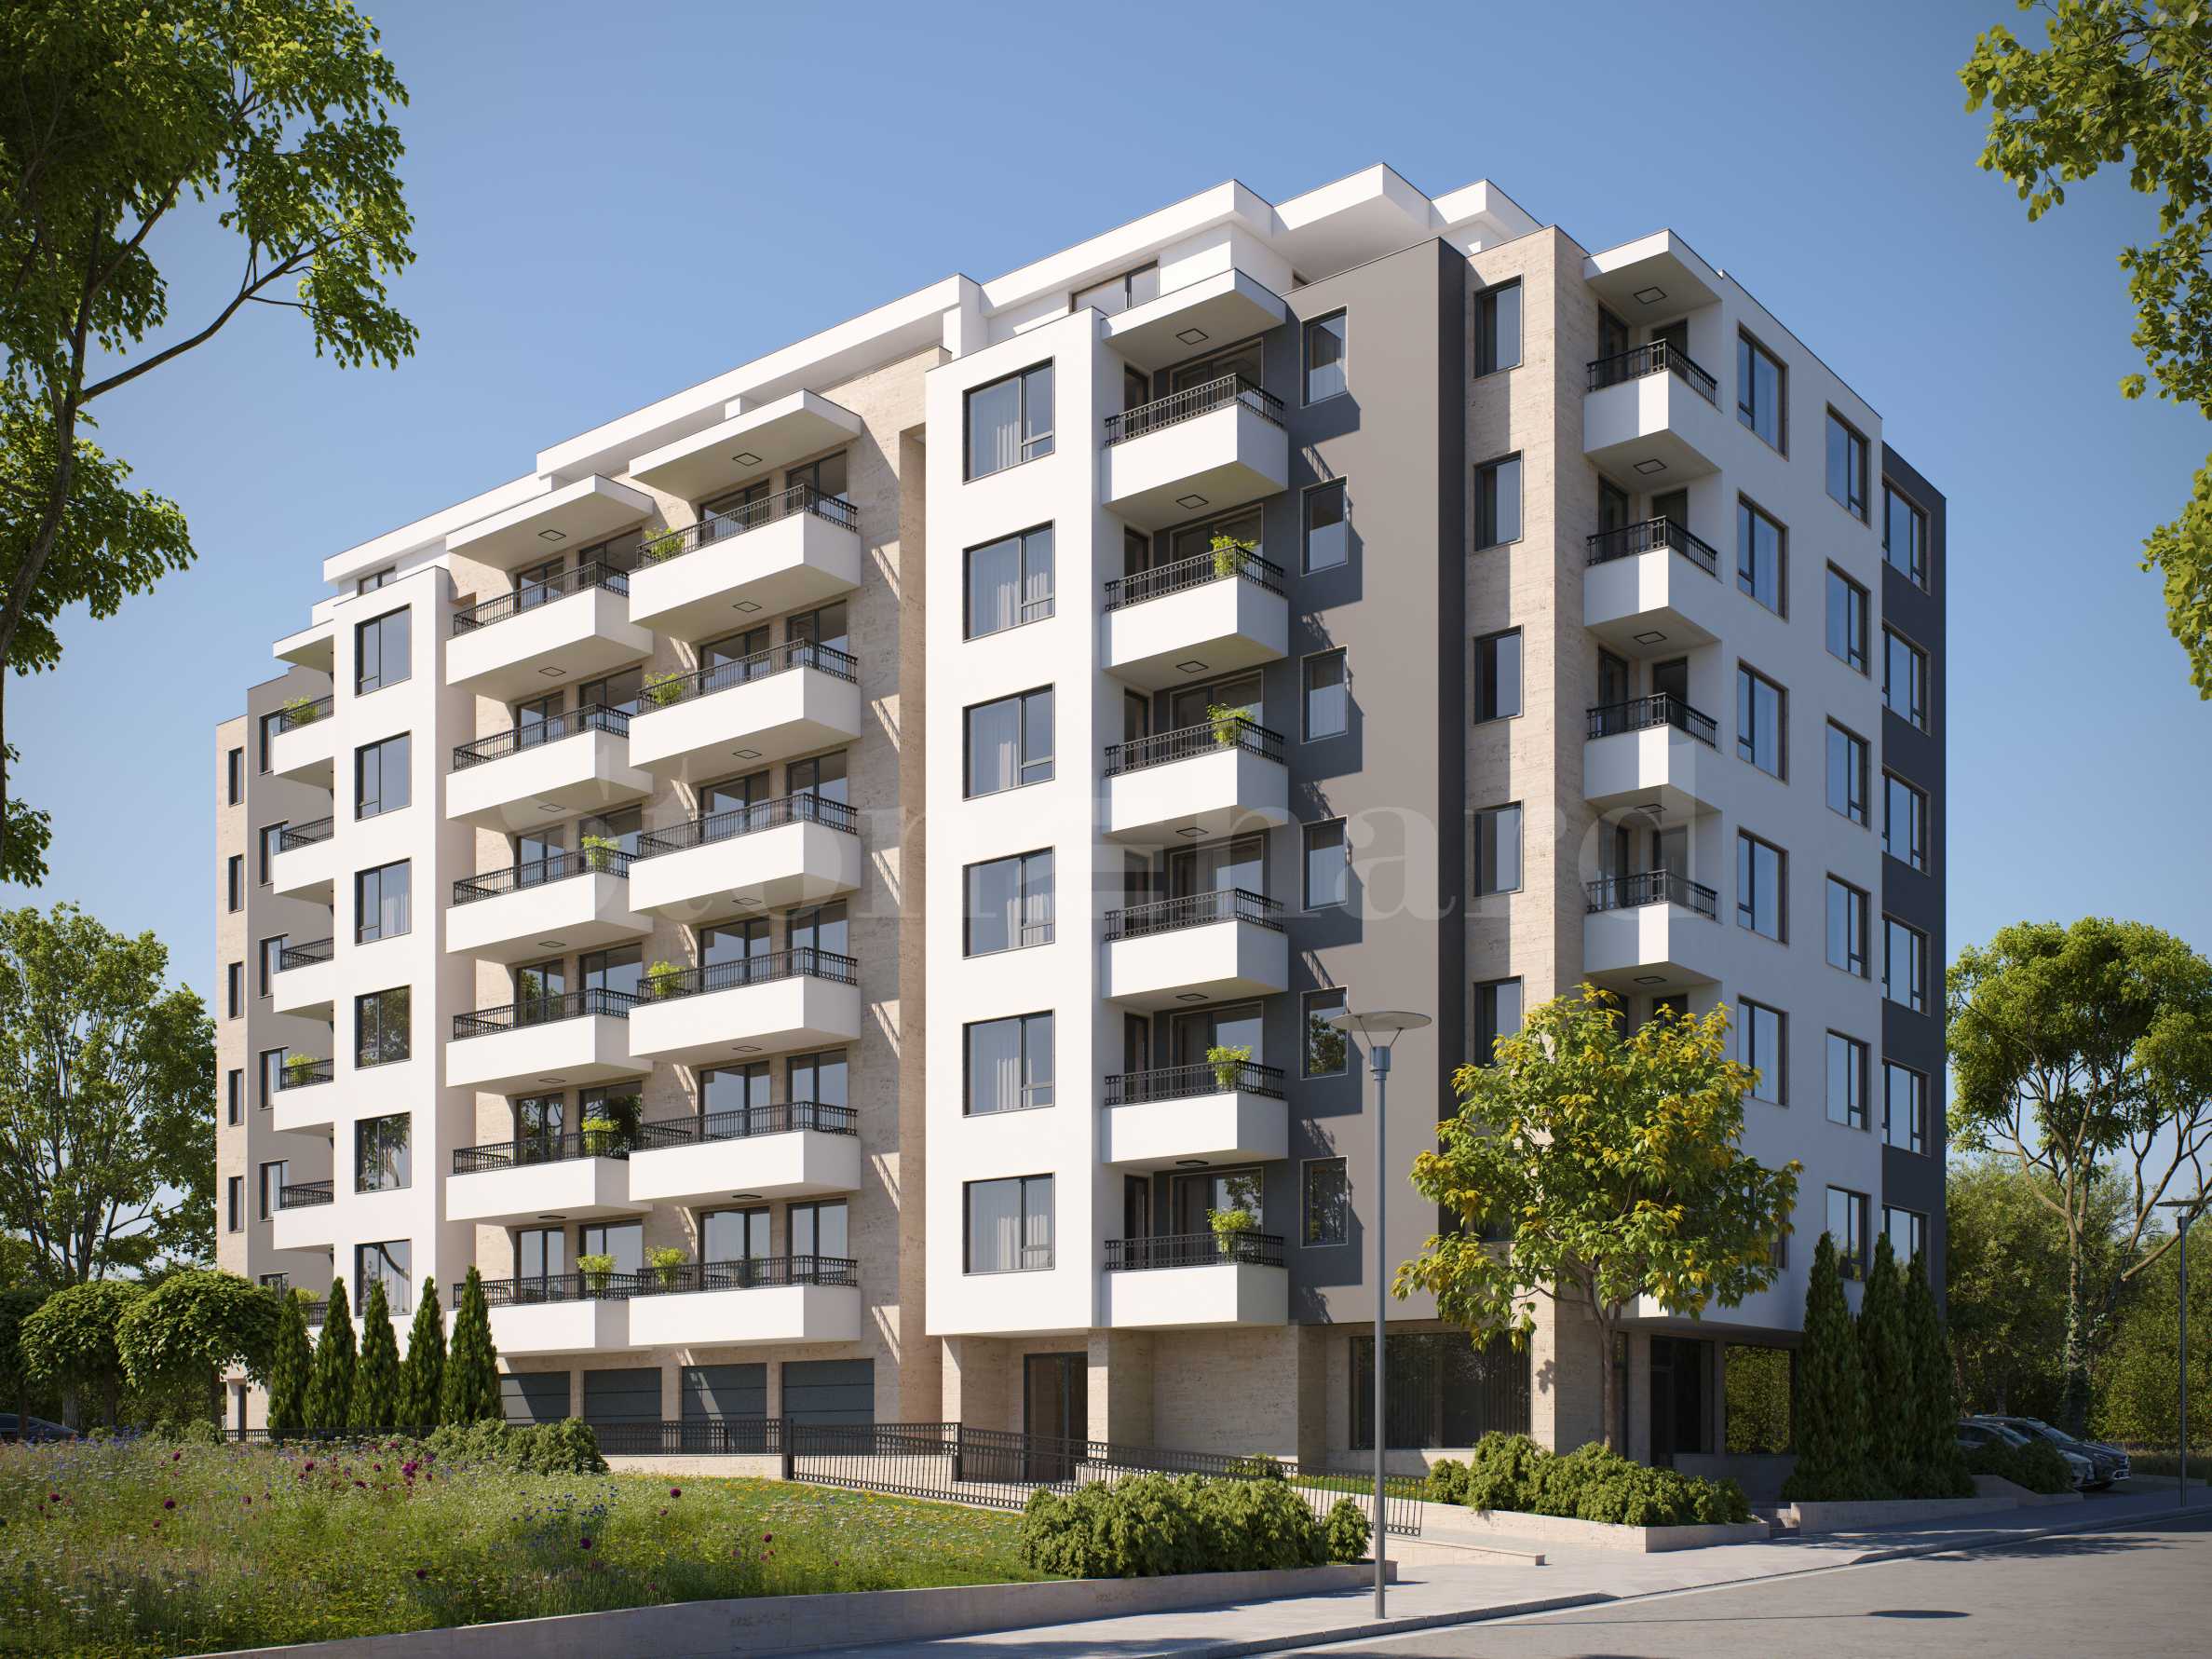 Apartments in a new residential building near National Sports Academy1 - Stonehard